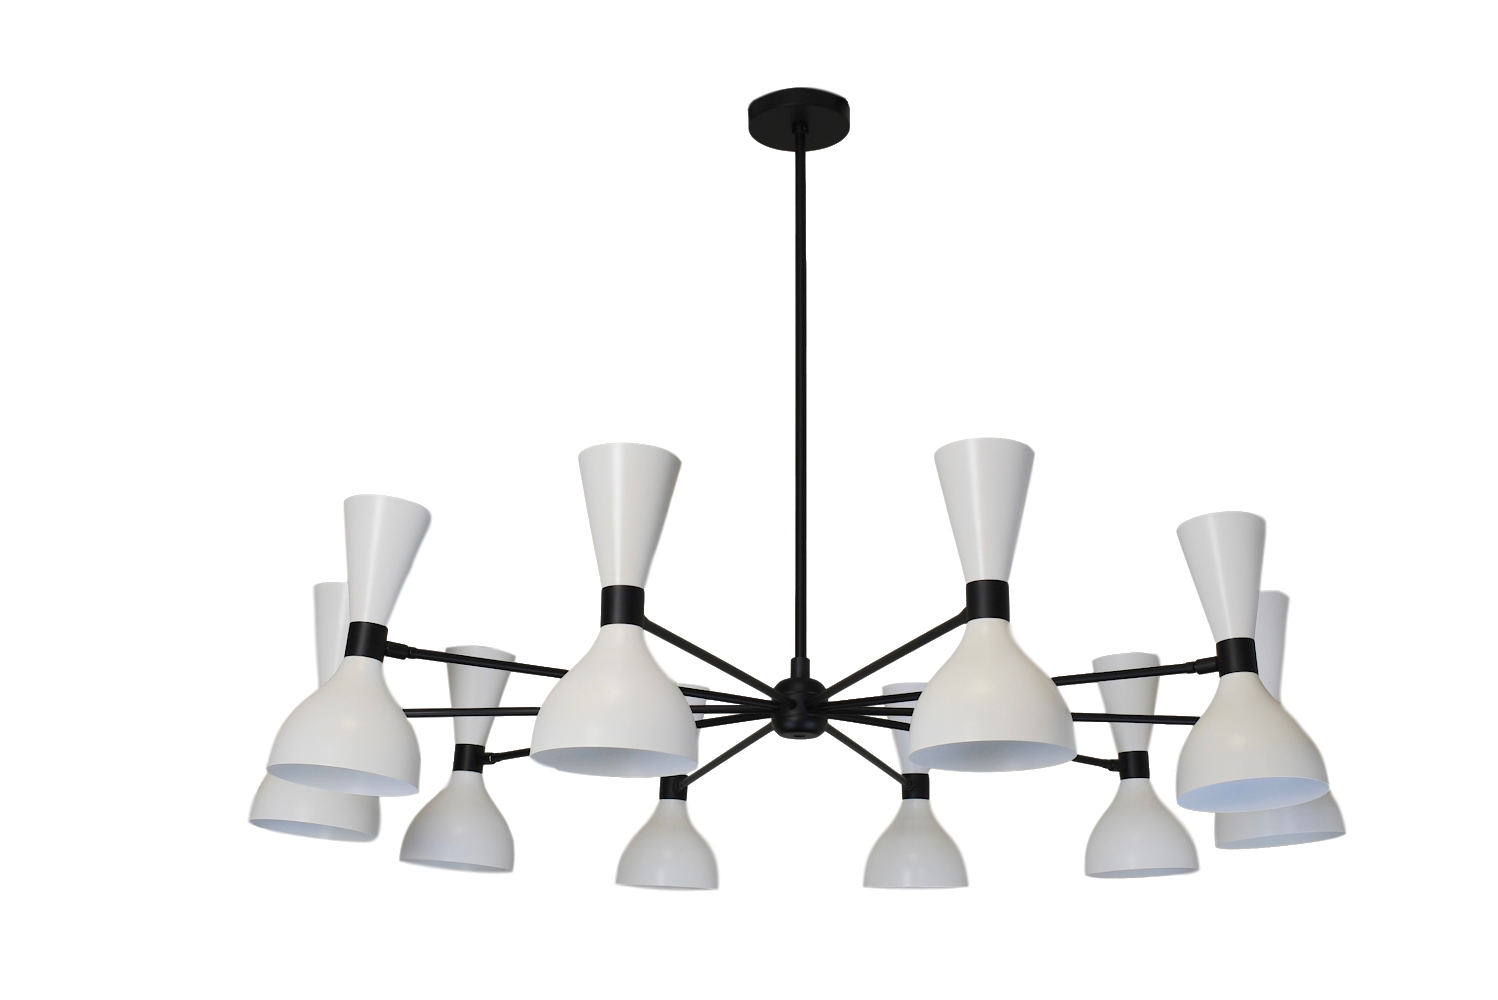 Blueprint Lighting launched the Ludo ceiling fixture 